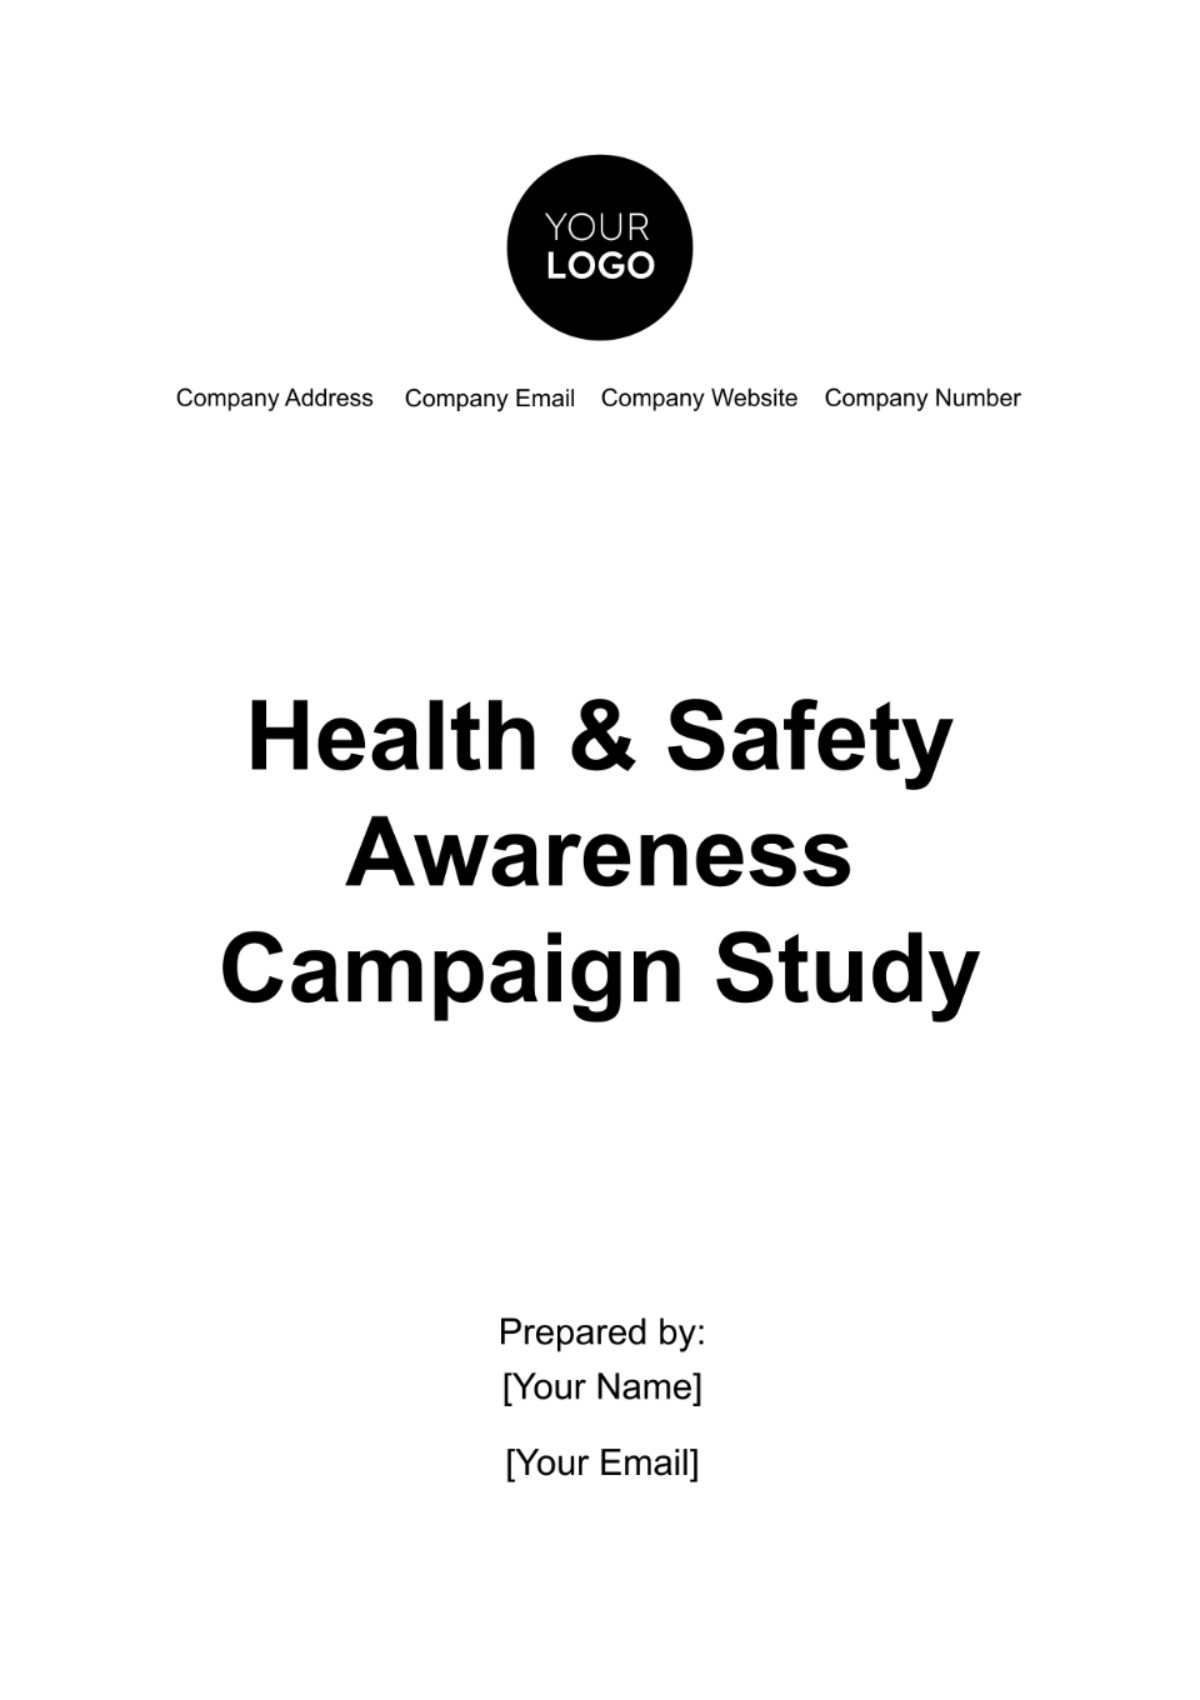 Health & Safety Awareness Campaign Study Template